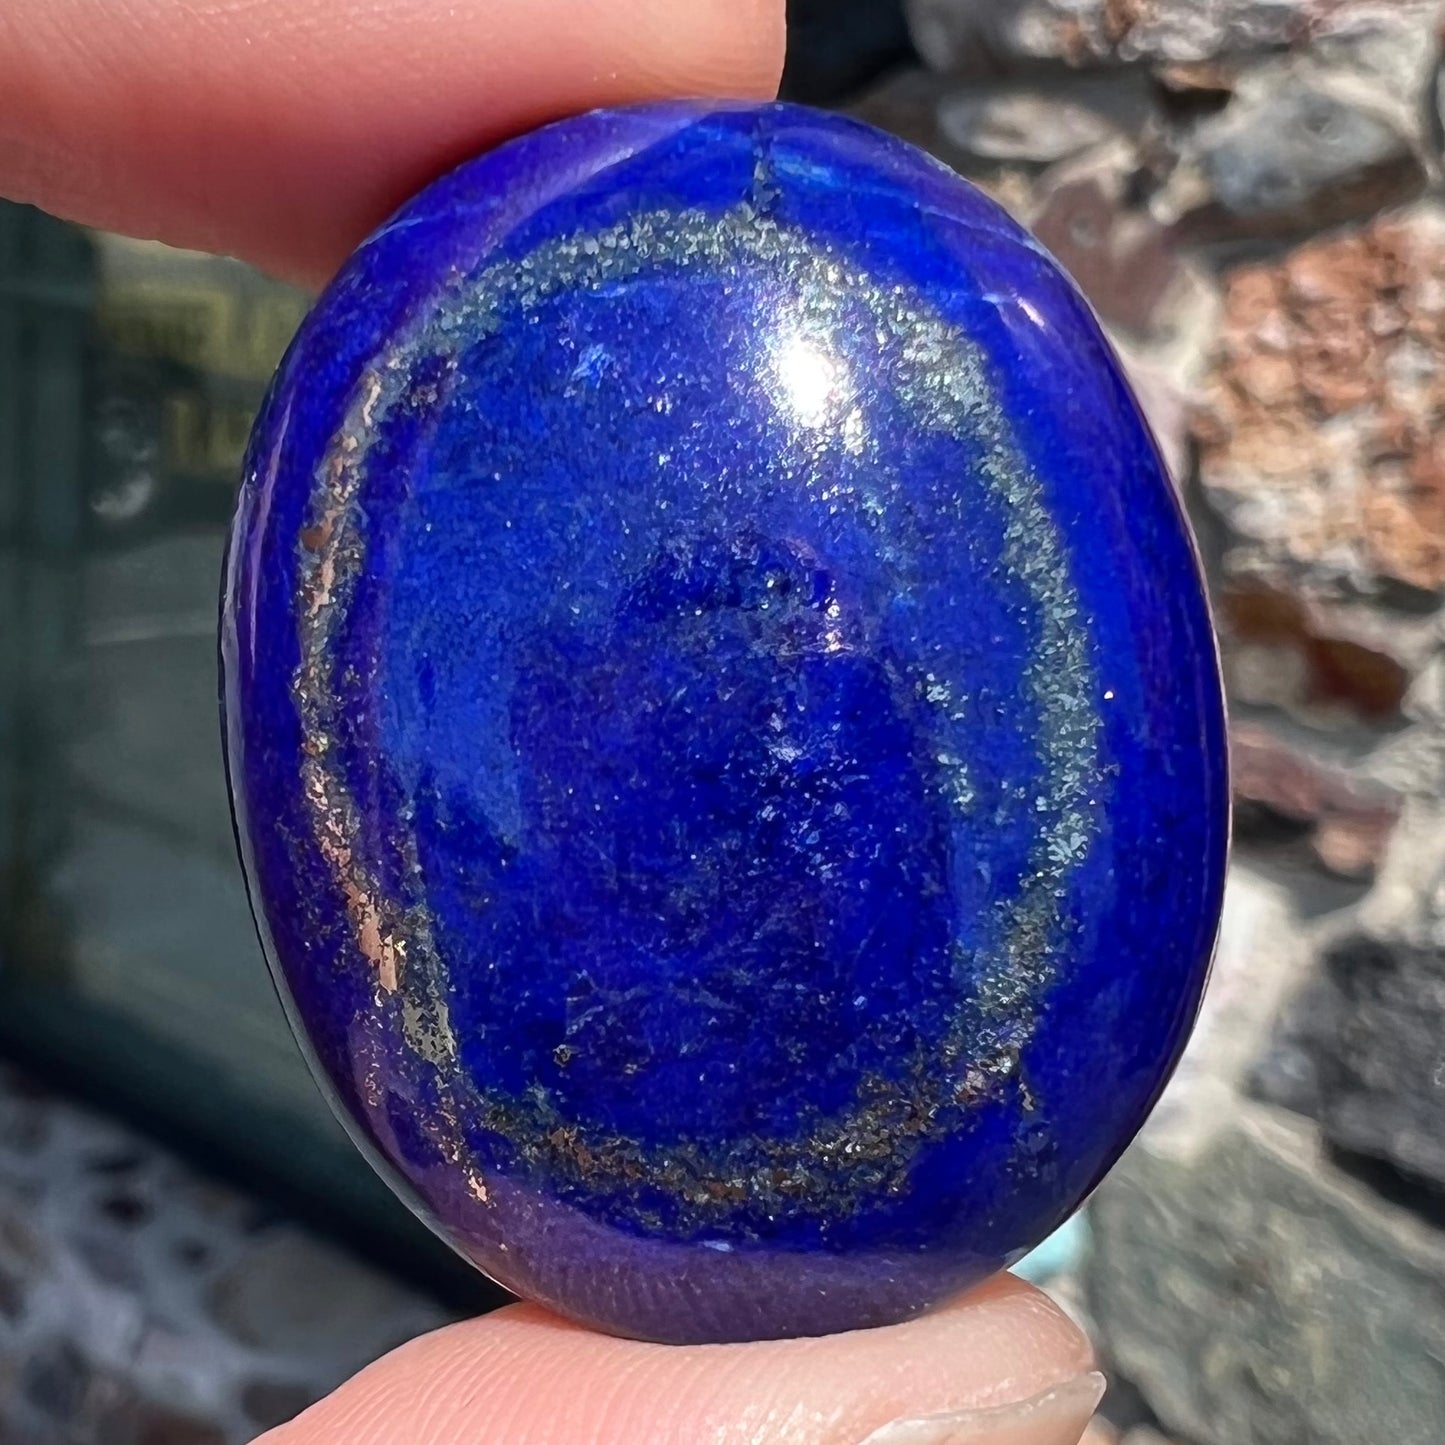 A loose, oval cabochon cut lapis lazuli stone.  A circle of pyrite inclusions is seen on the front.